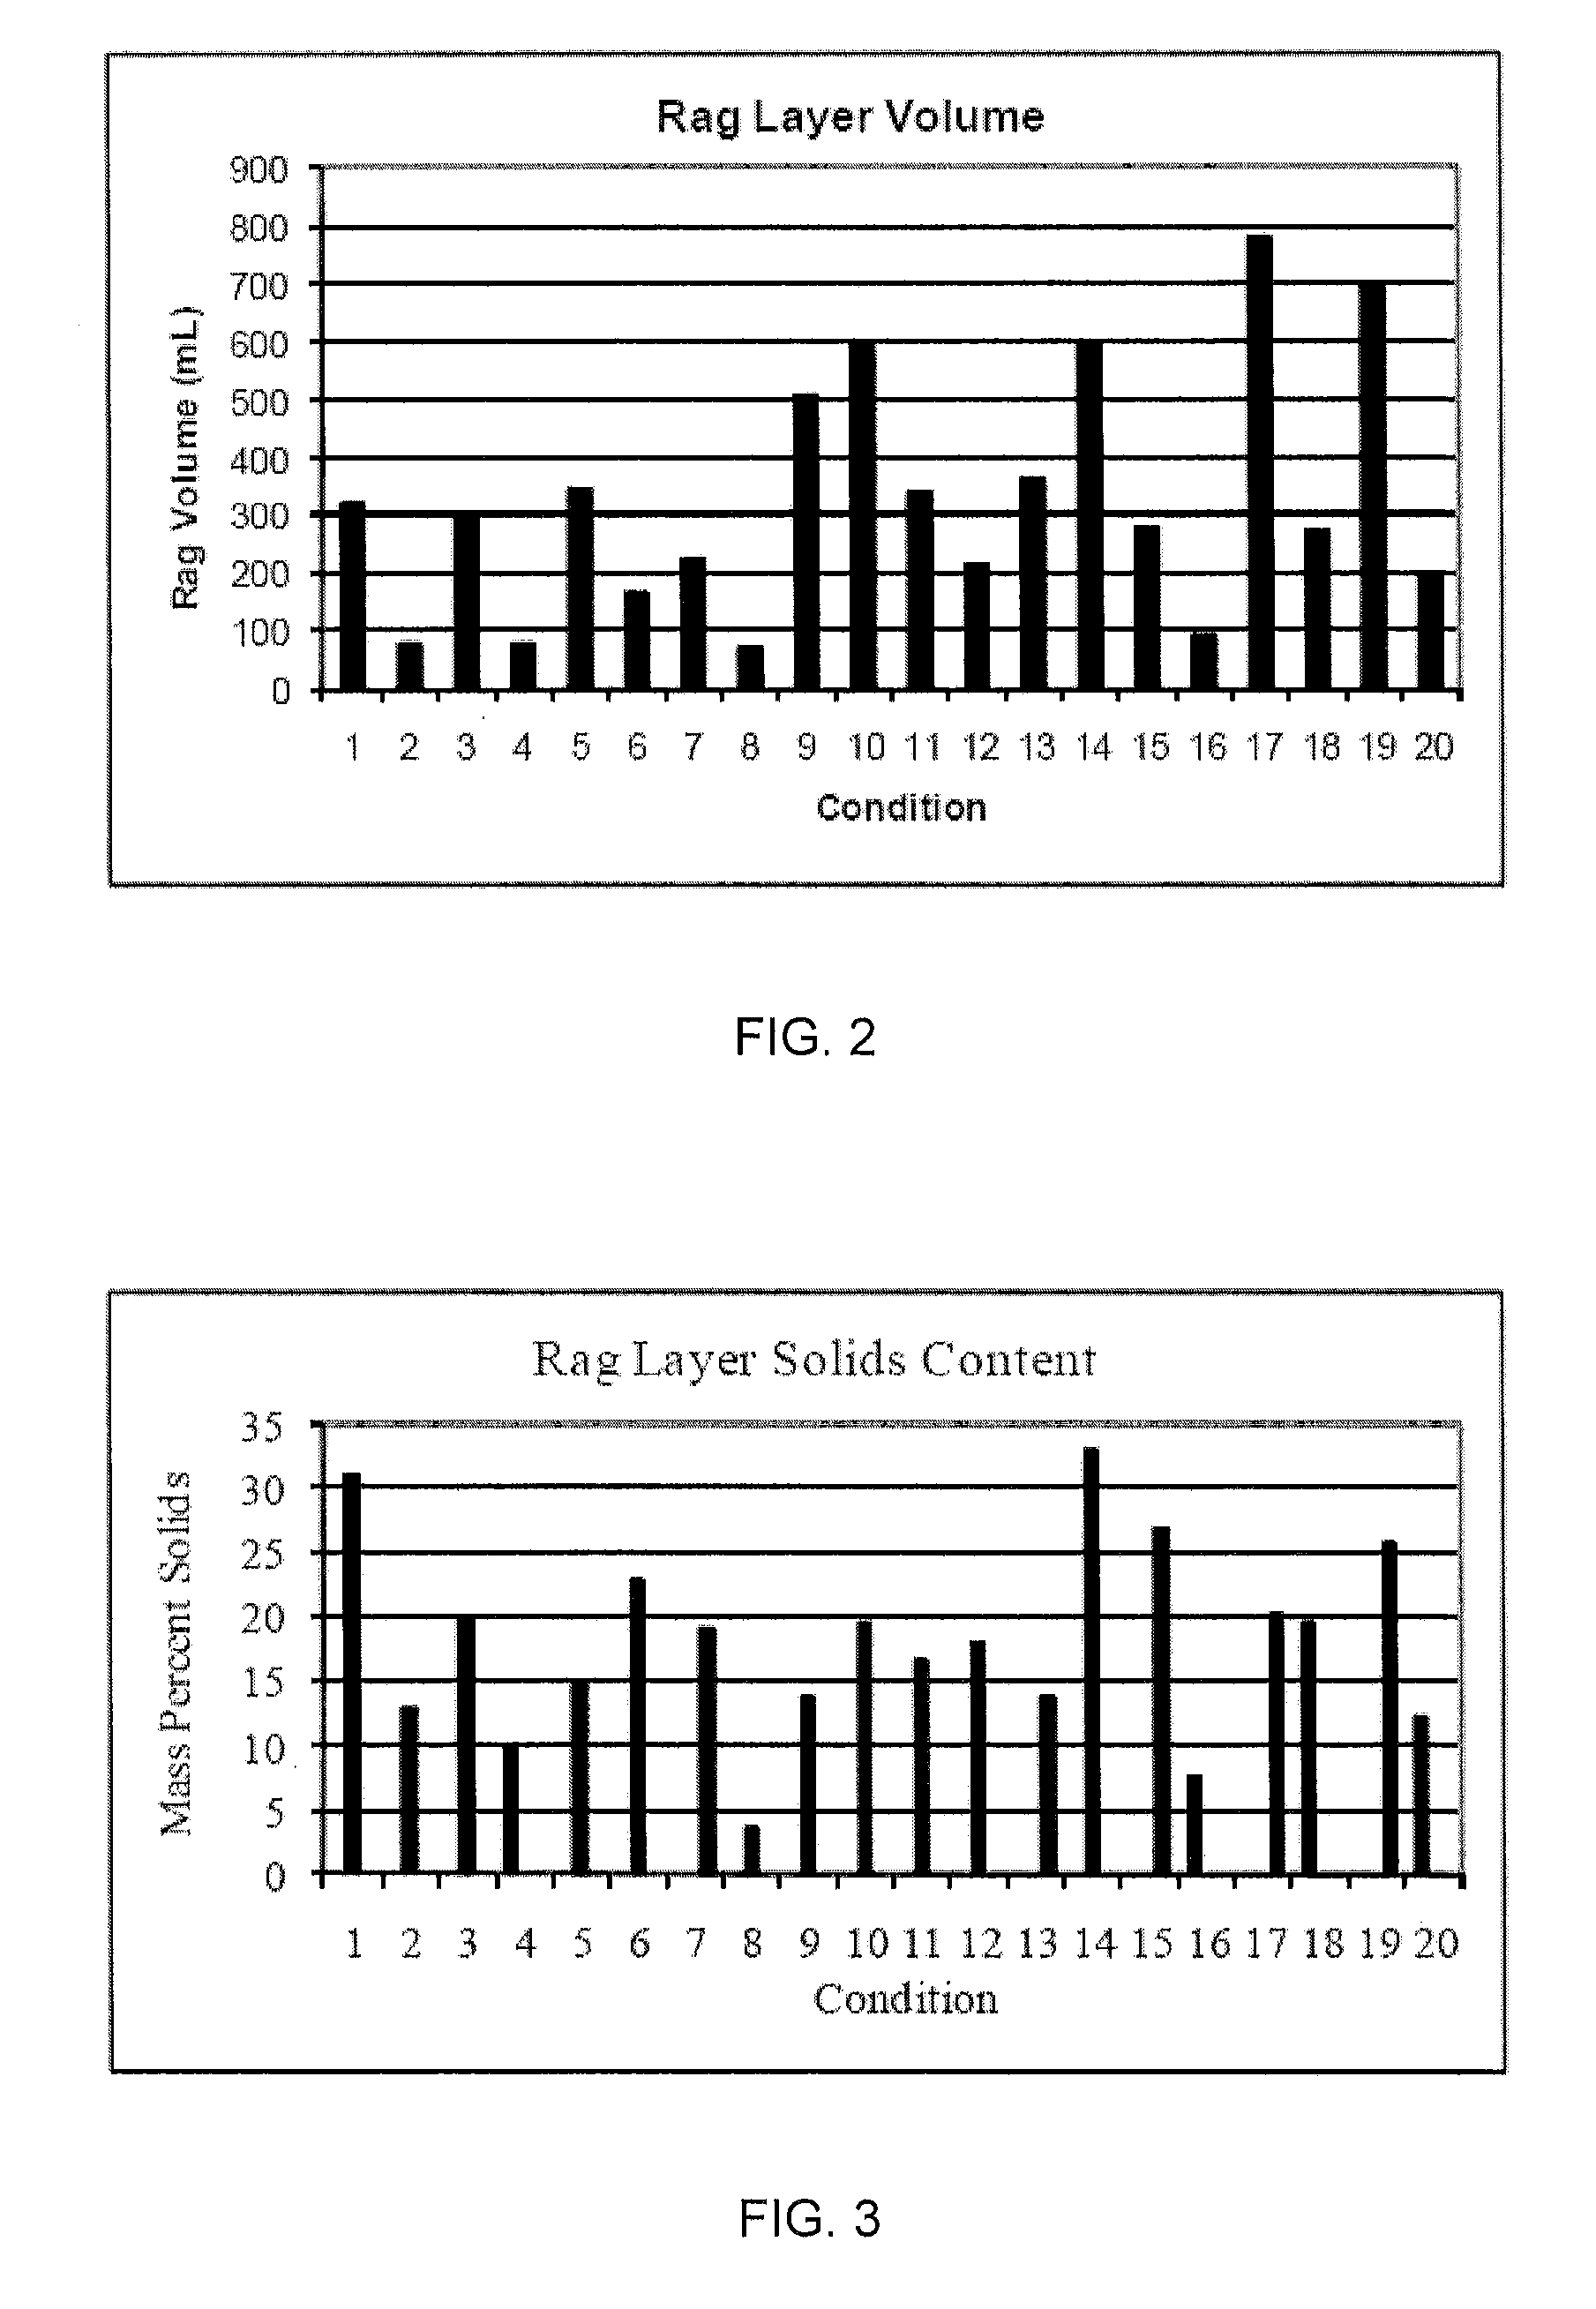 Method for reducing rag layer volume in stationary froth treatment